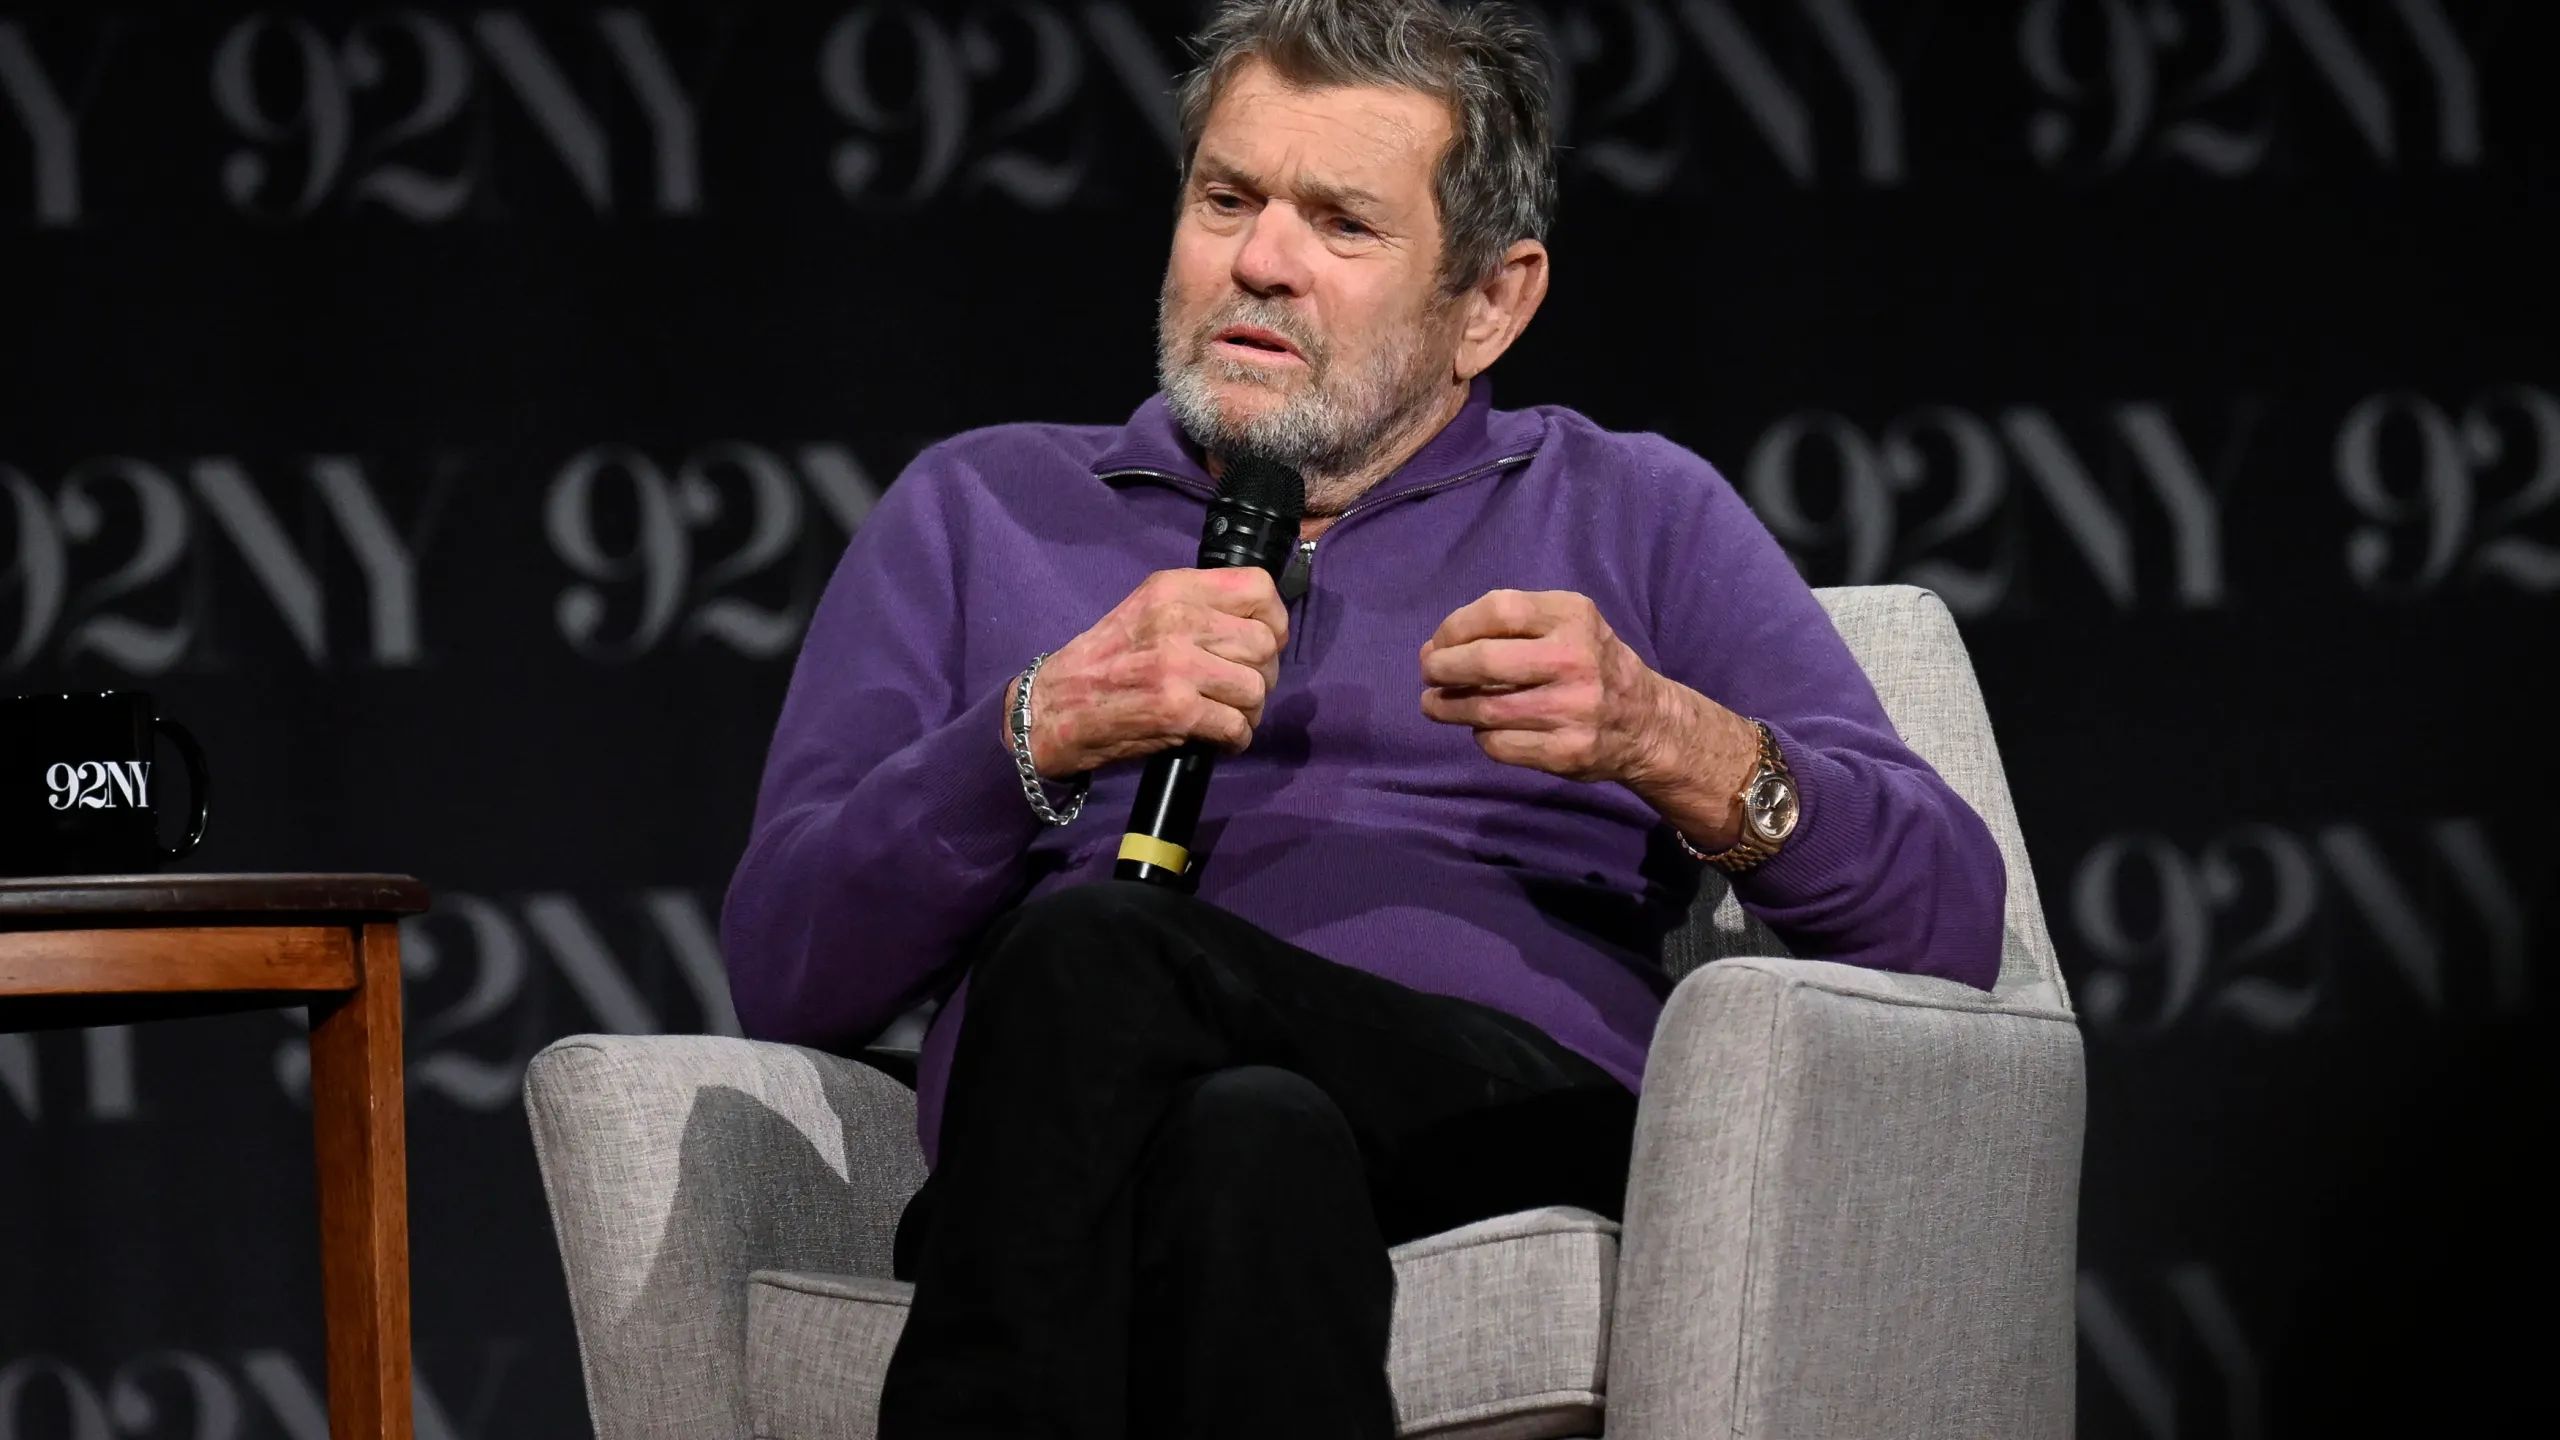 Jann Wenner Removed From Rock & Roll HOF Board After Controversial Remarks On Black And Female Artists